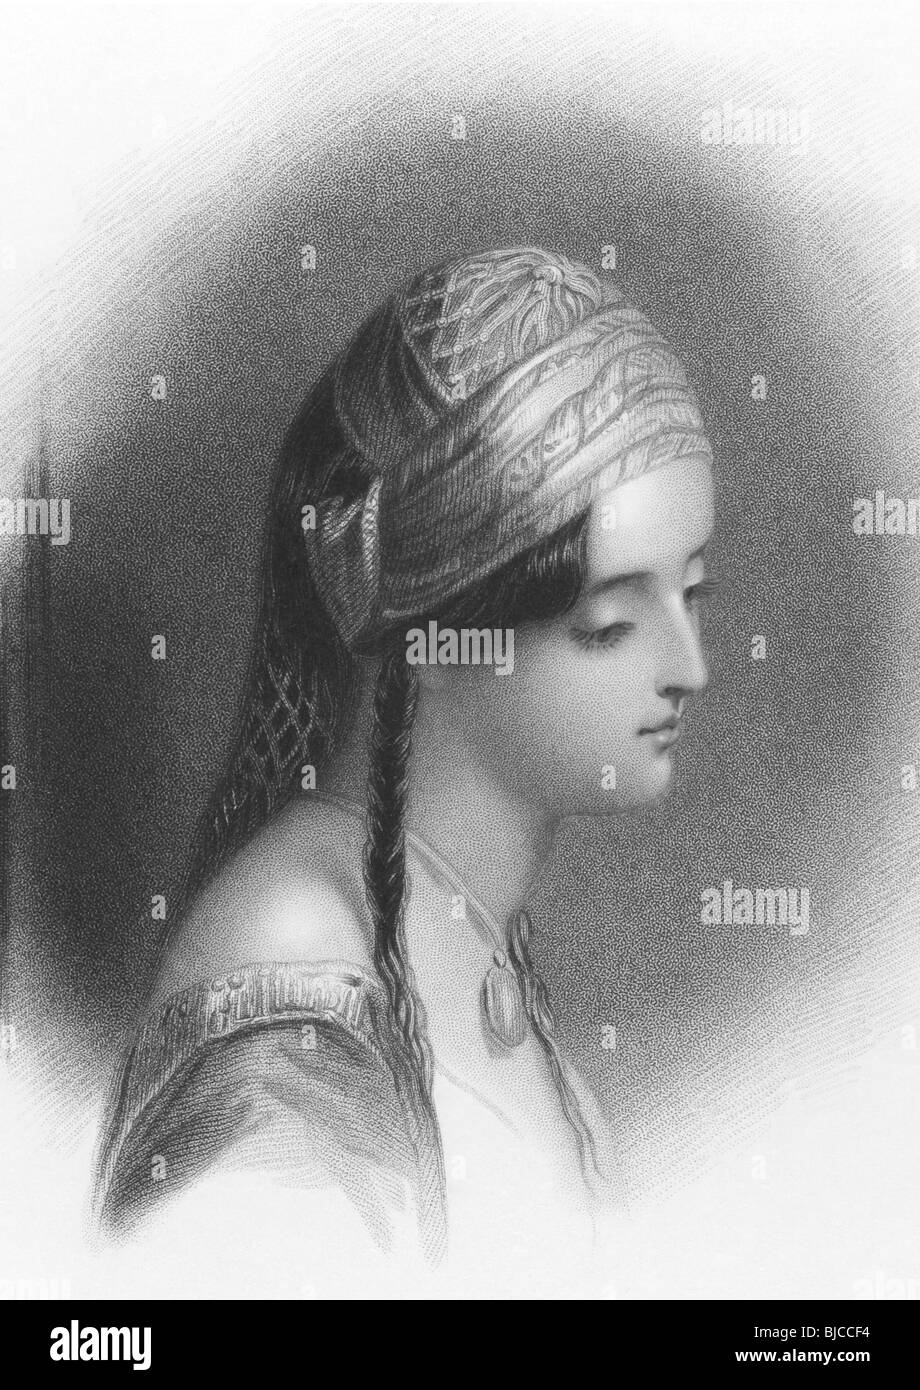 Lord Byron's Maid of Athens on engraving from the 1800s. Theresa Makri was a Greek girl,Lord Byron fell in love & wrote a poem. Stock Photo